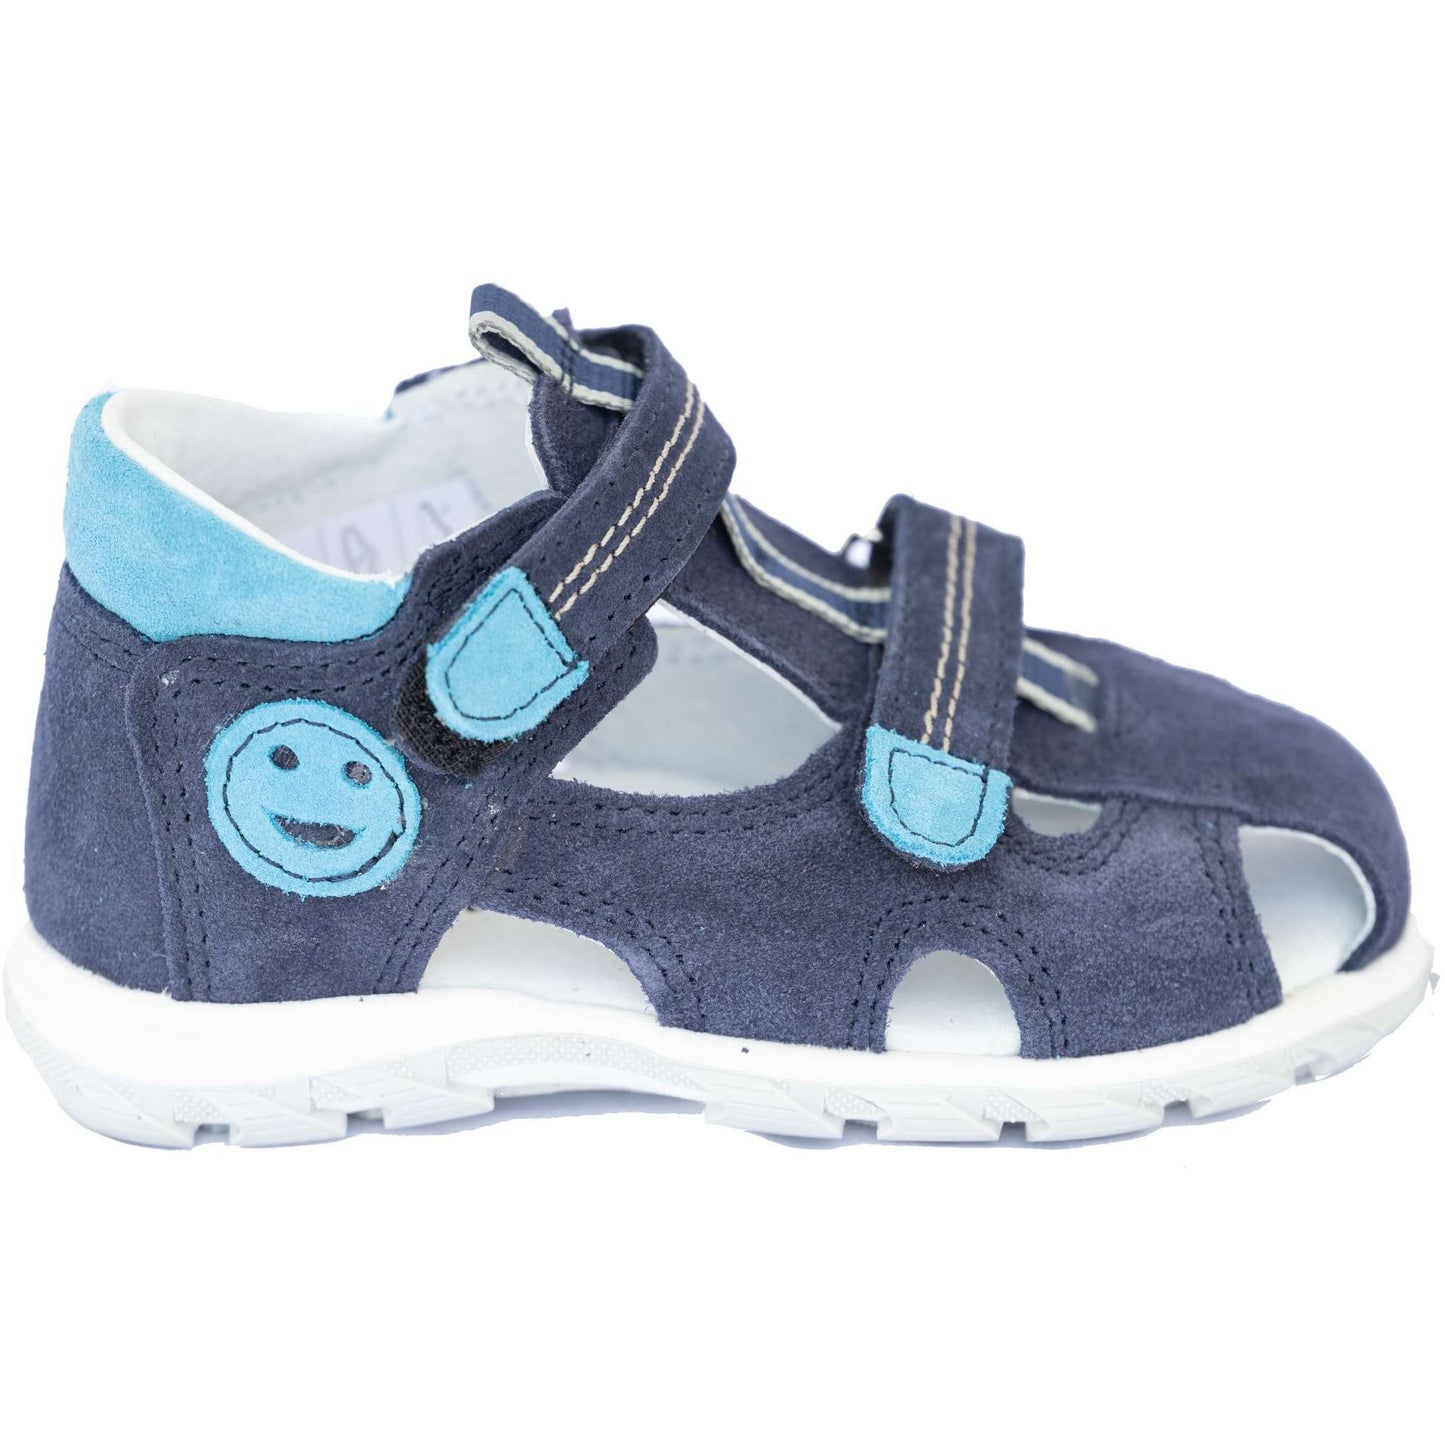 orthopedic toddler boy sandals: T102: color blue turquoise - feelgoodshoes.ae